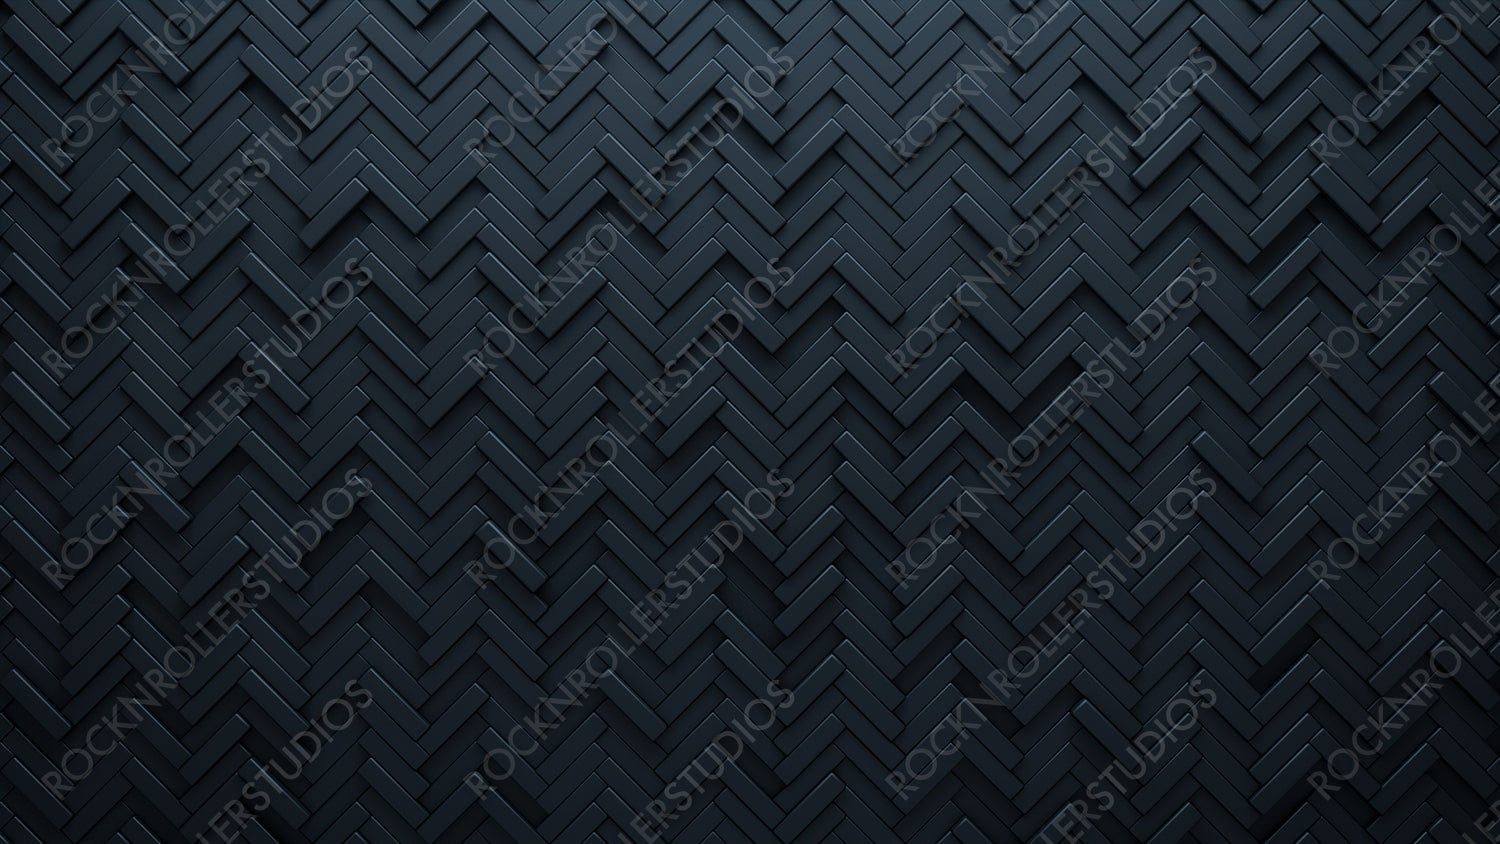 Futuristic, High Tech, dark background, with a herringbone block structure. Wall texture with a 3D parquet tile pattern. 3D render